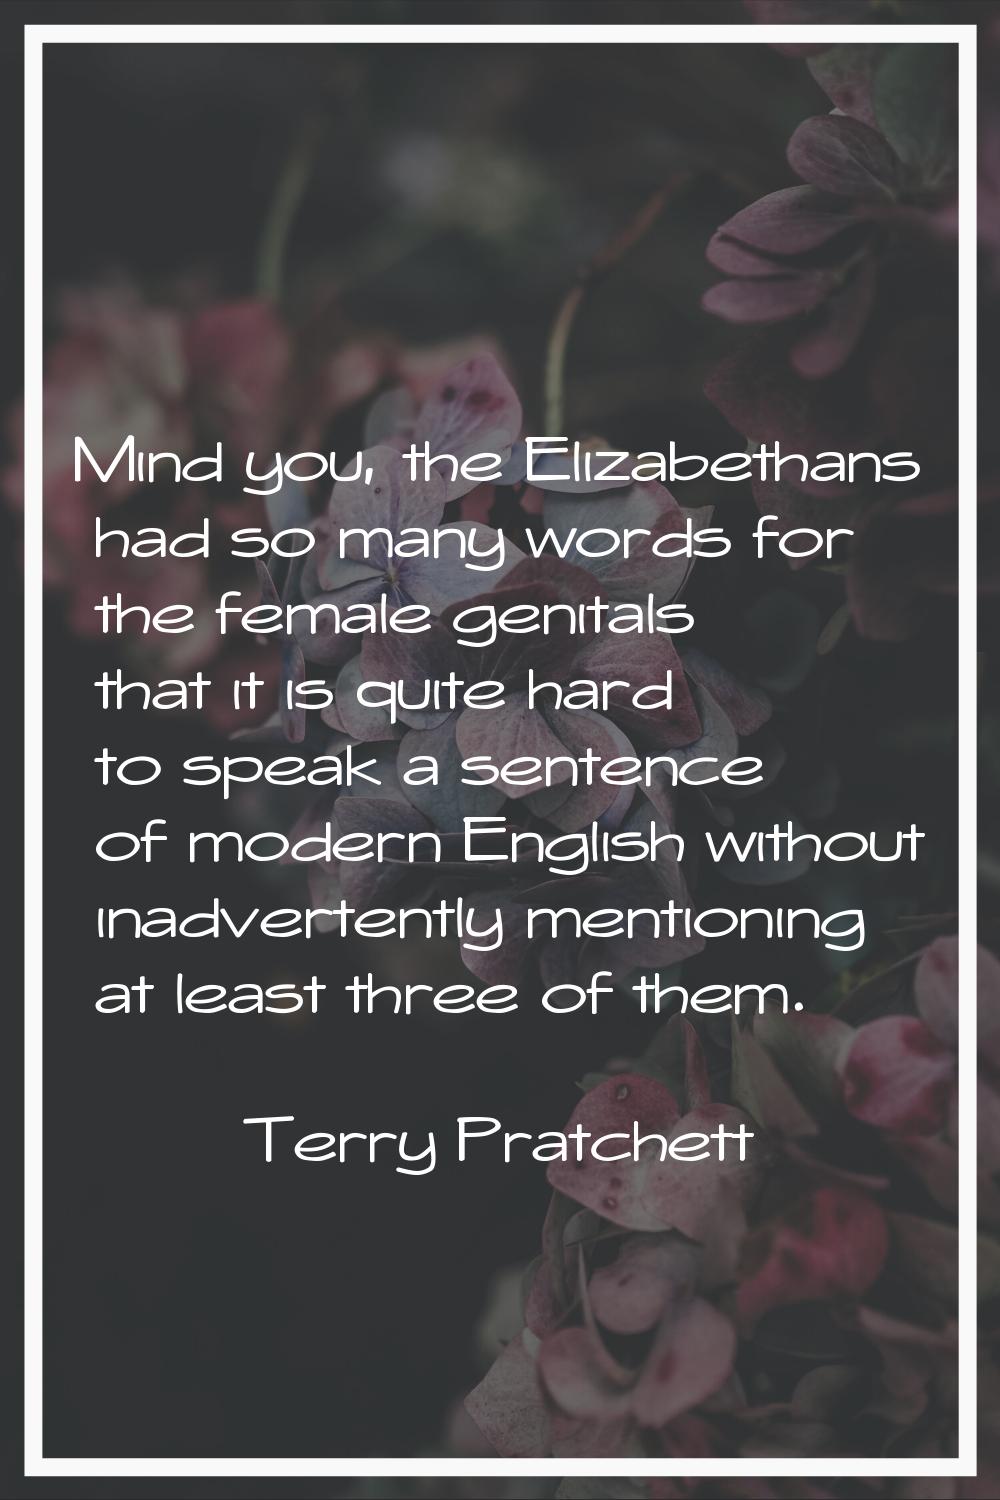 Mind you, the Elizabethans had so many words for the female genitals that it is quite hard to speak